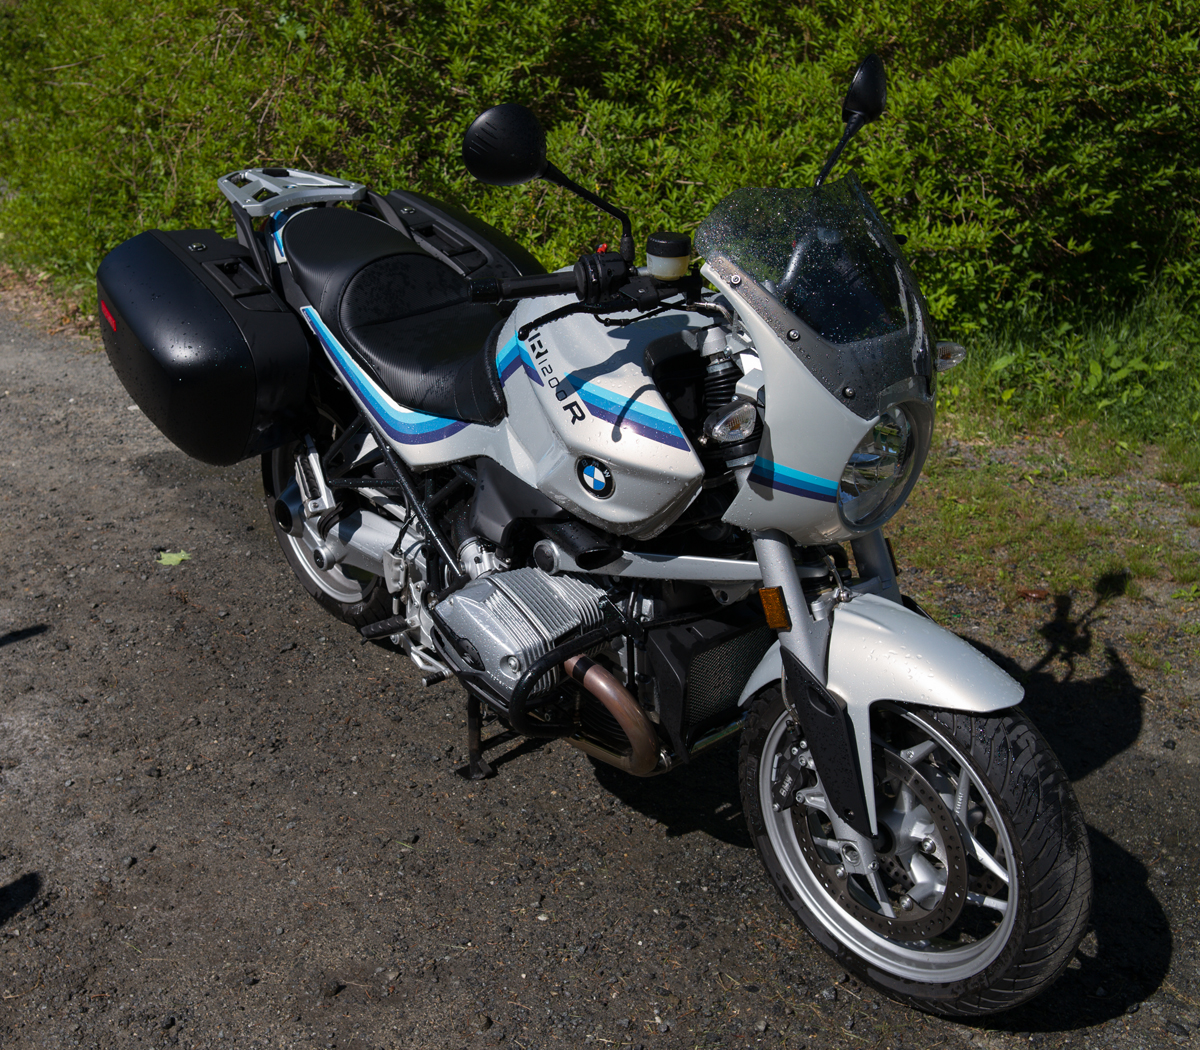 Bmw motorcycle dealerships in vermont #1